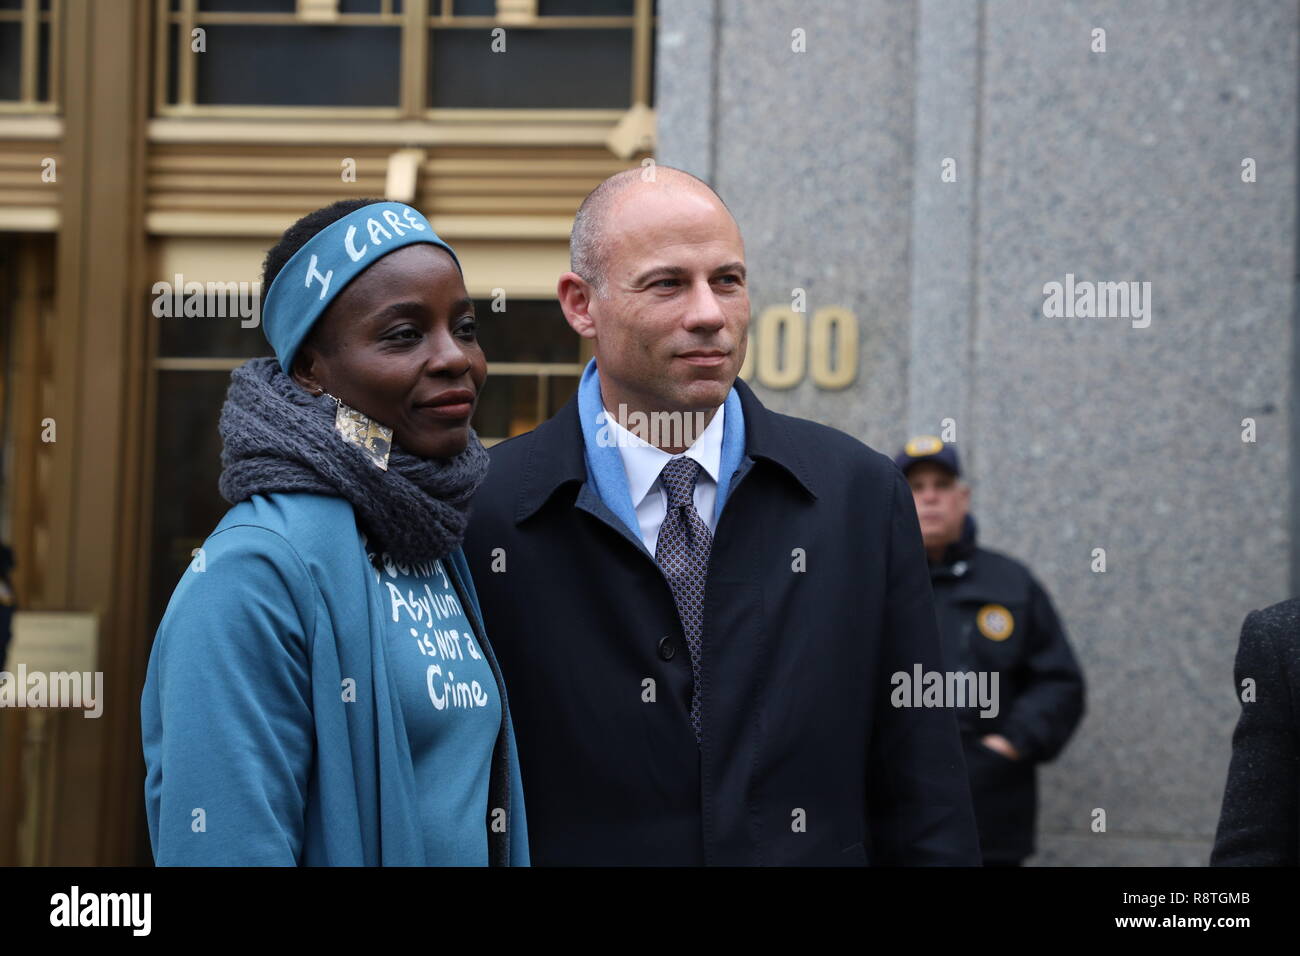 New York, NY - Bench trial was held for Patricia Okoumou, with her lawyers Michael Avenatti and Ron Kuby, at Federal Court in New York City. Patricia Okoumou climbed the base of the Statue Of Liberty on July 4th, in protest to imprisonment of children at the boarder. Guest speakers Hawk Newsom the founder of Black Lives Matter and Indya Adrianna Moore, transgender actress from Pose. Credit: SCOOTERCASTER/Alamy Live News Stock Photo